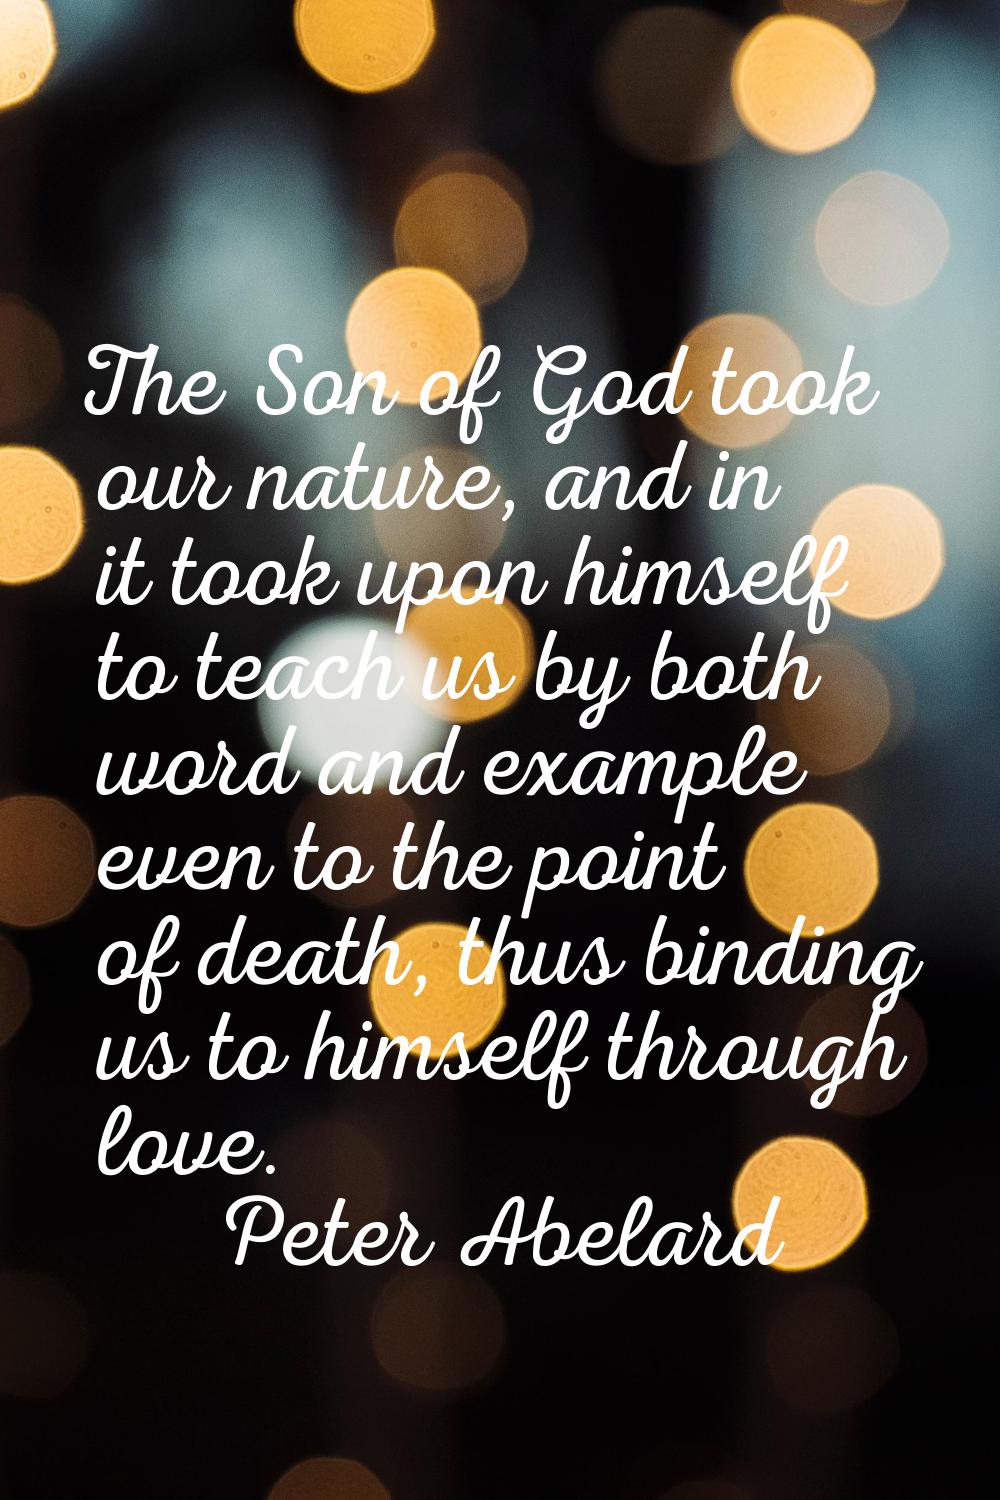 The Son of God took our nature, and in it took upon himself to teach us by both word and example ev